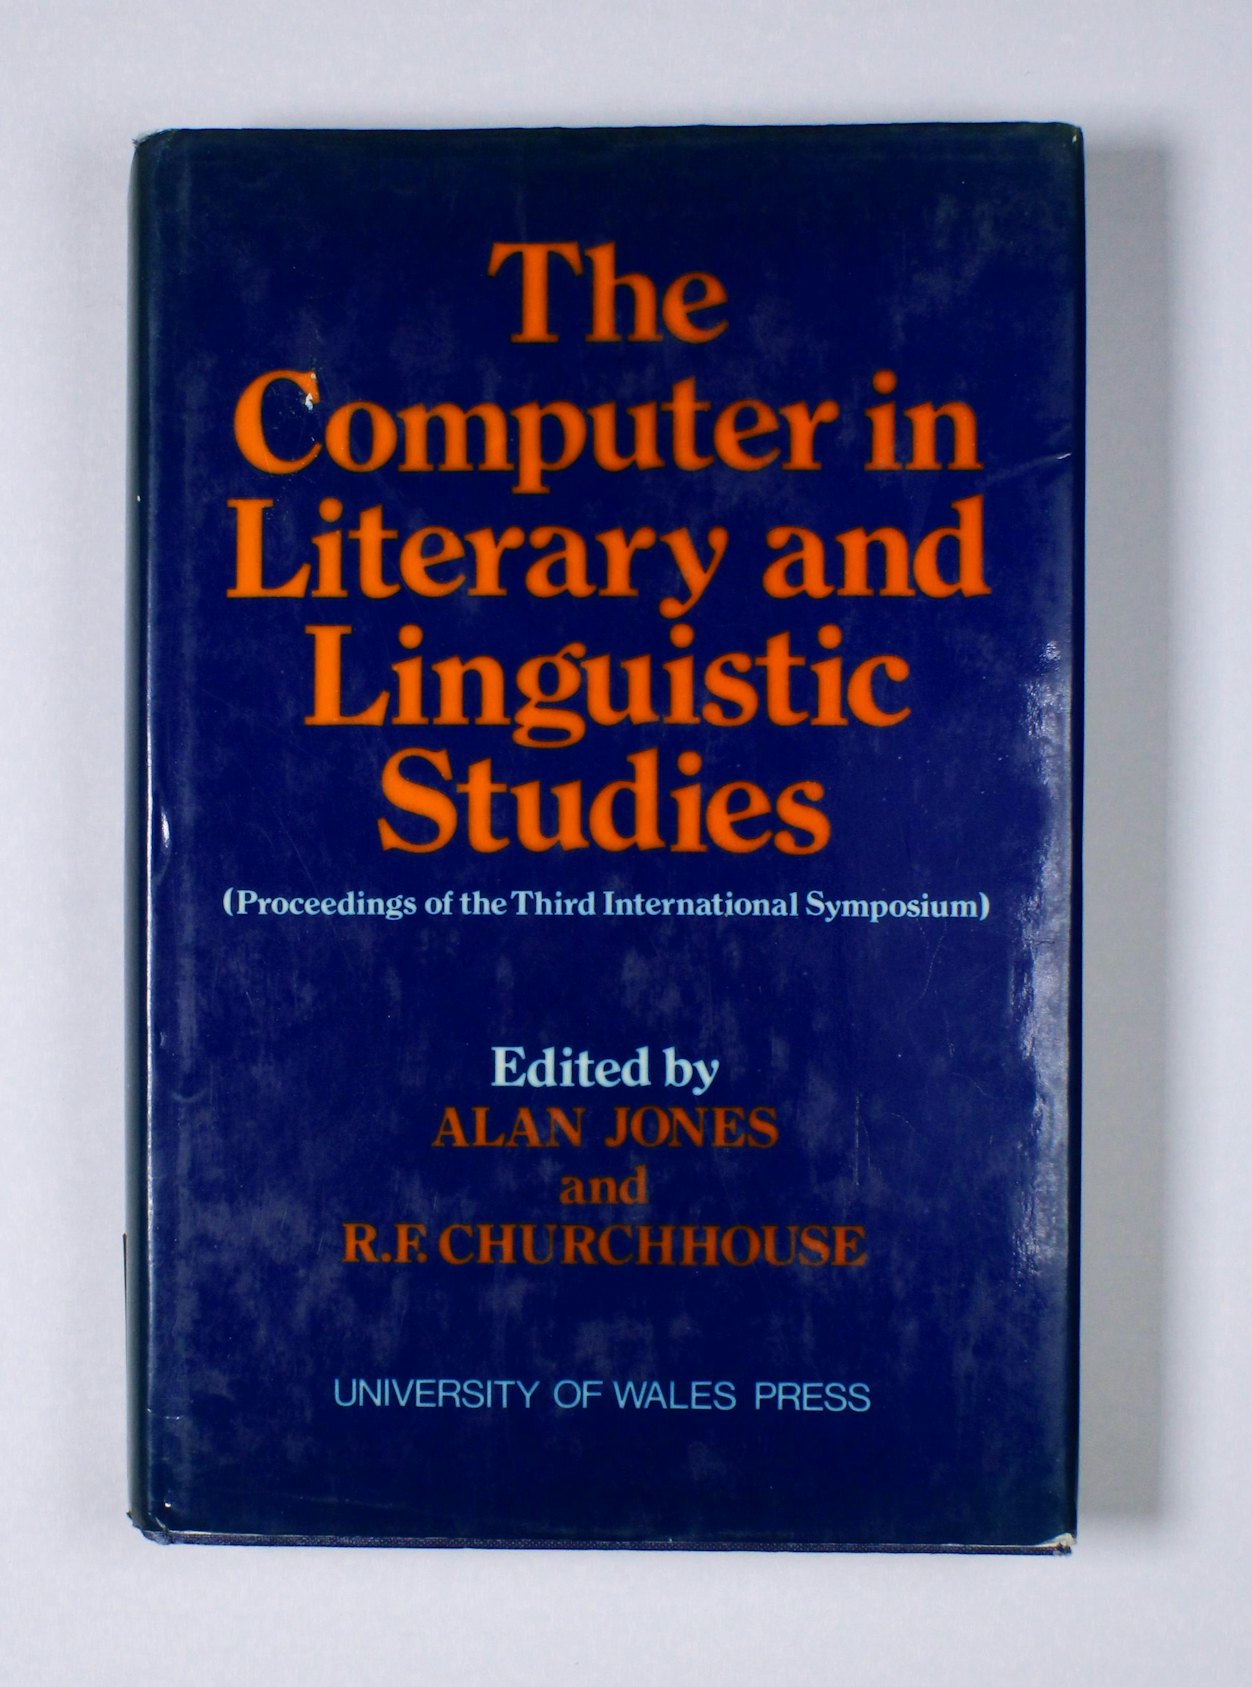 The Computer in Literary and Linguistic Studies